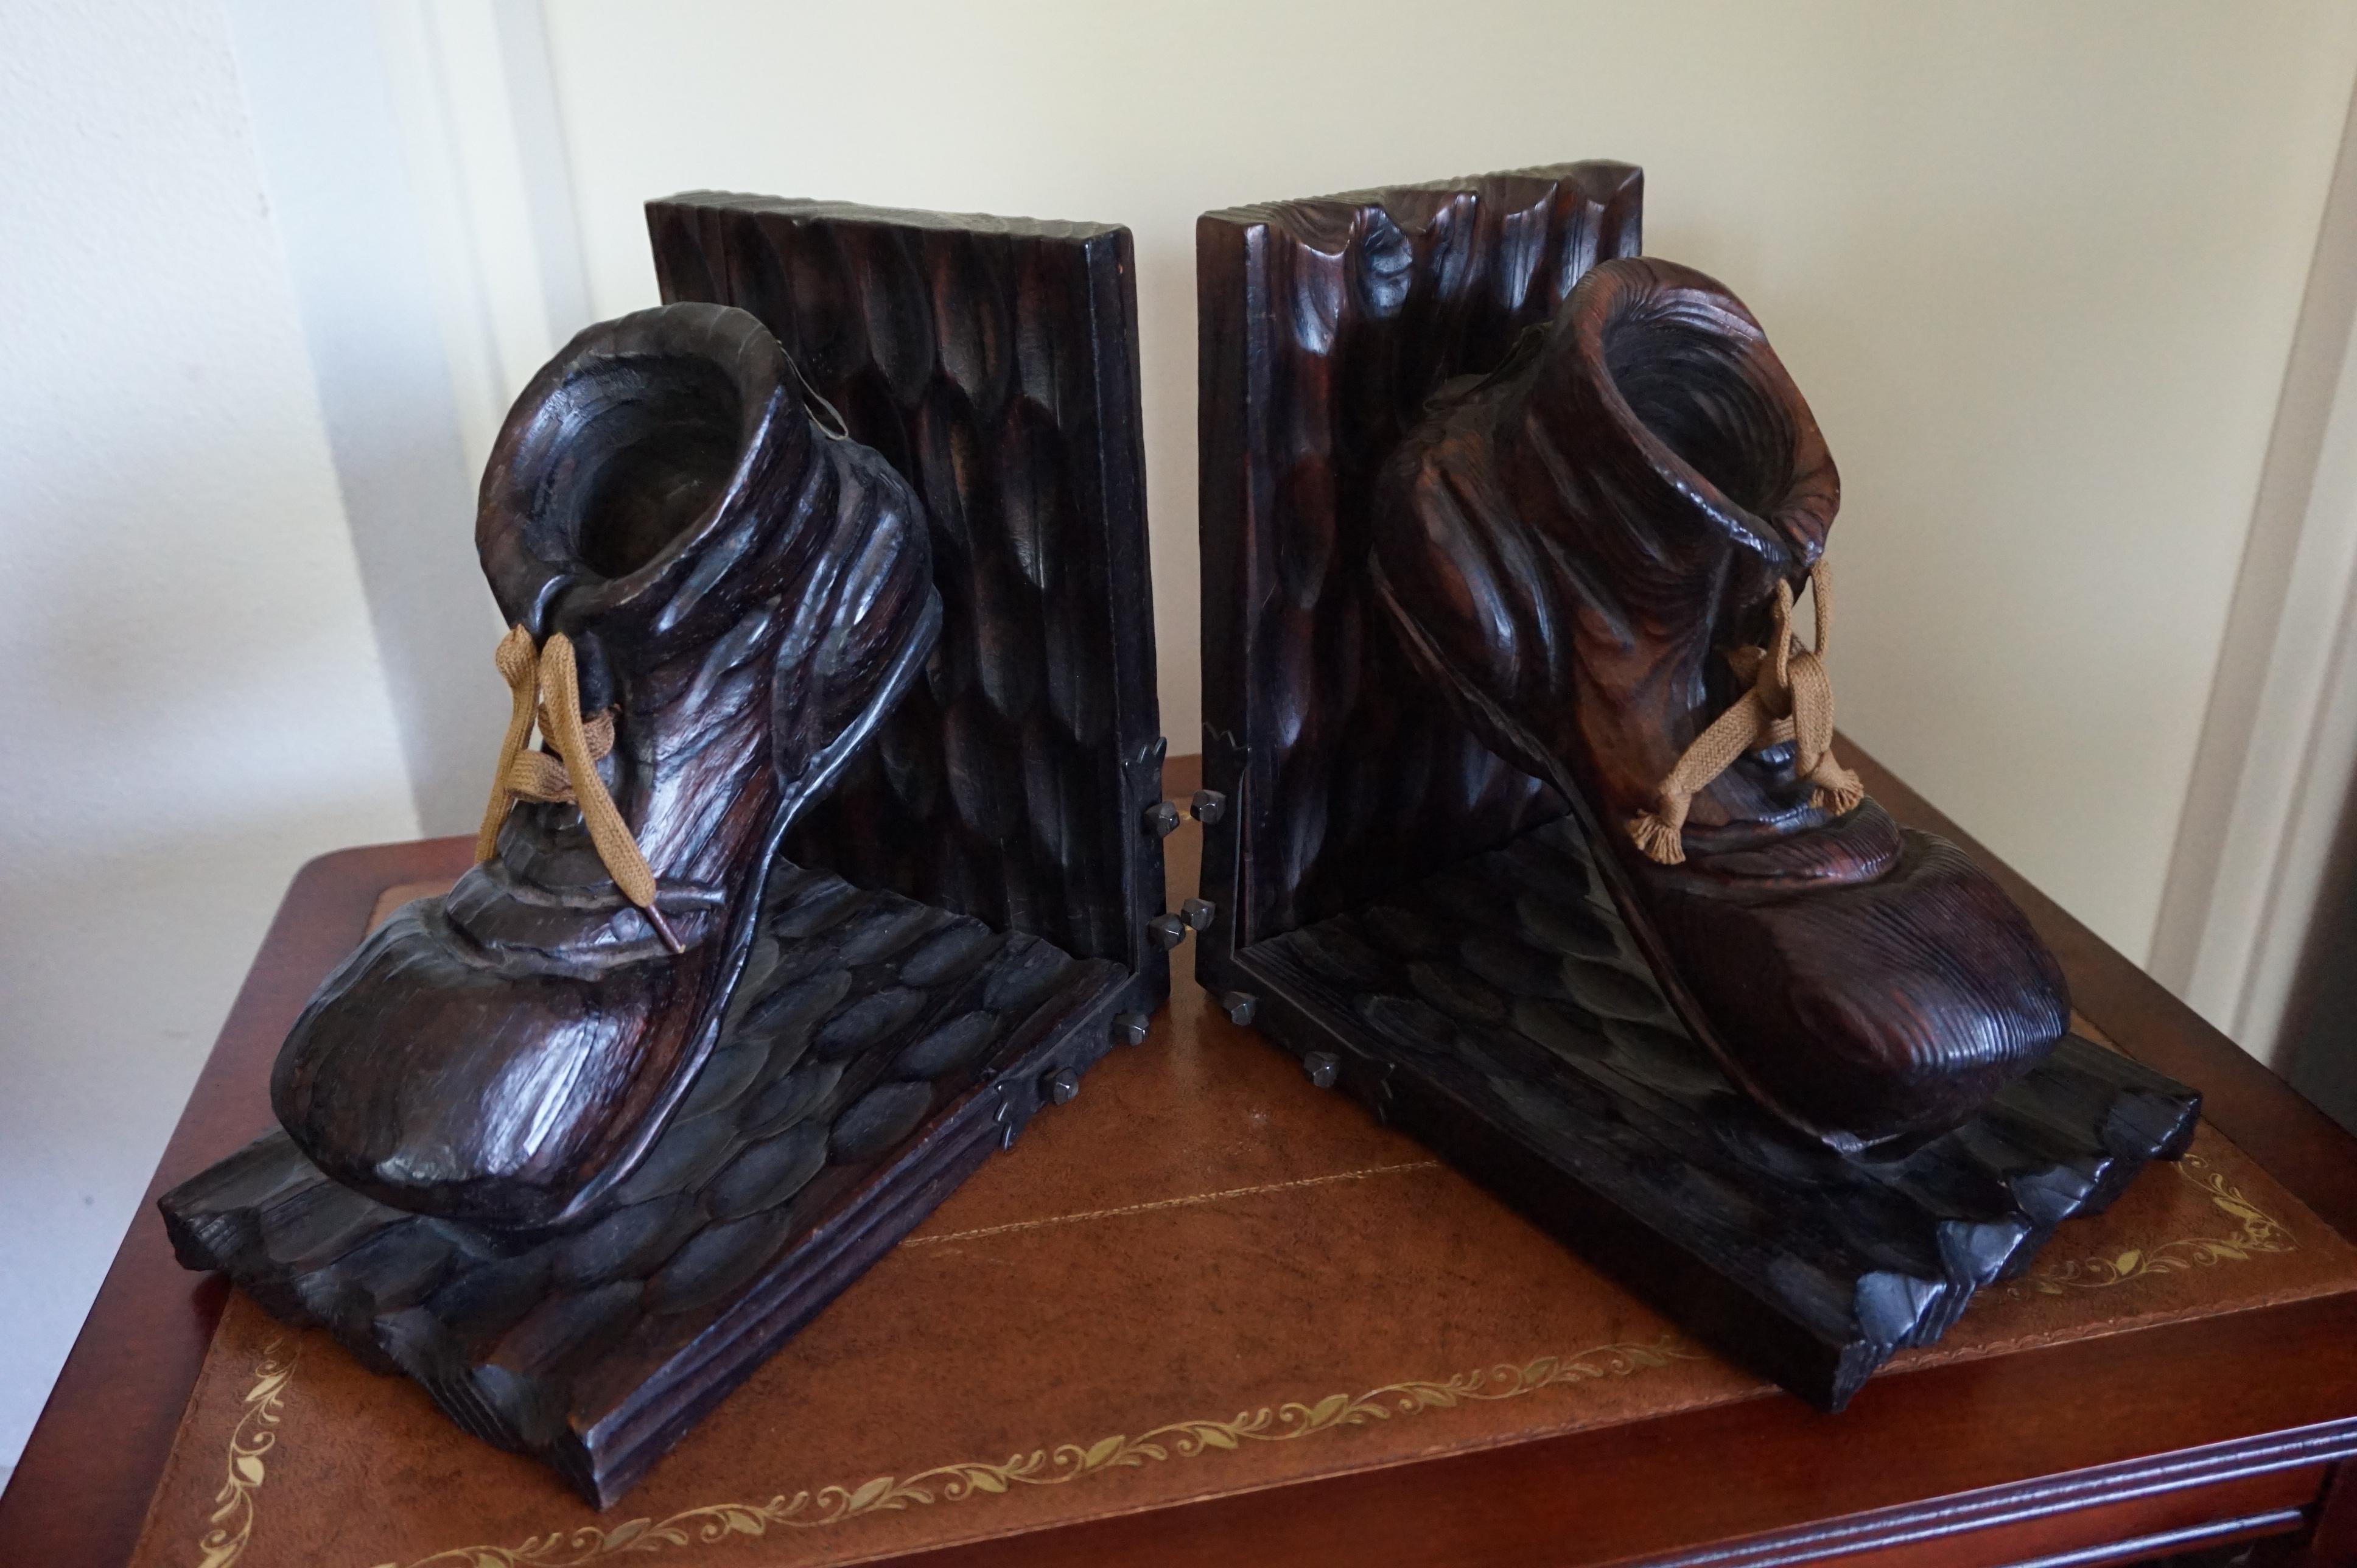 Highly decorative and coolest ever, soccer shoes bookends.

All handcrafted from wood and wrought iron these highly decorative bookends come with wonderfully carved soccer shoes. They are exactly like the earliest soccer shoes that were made at the